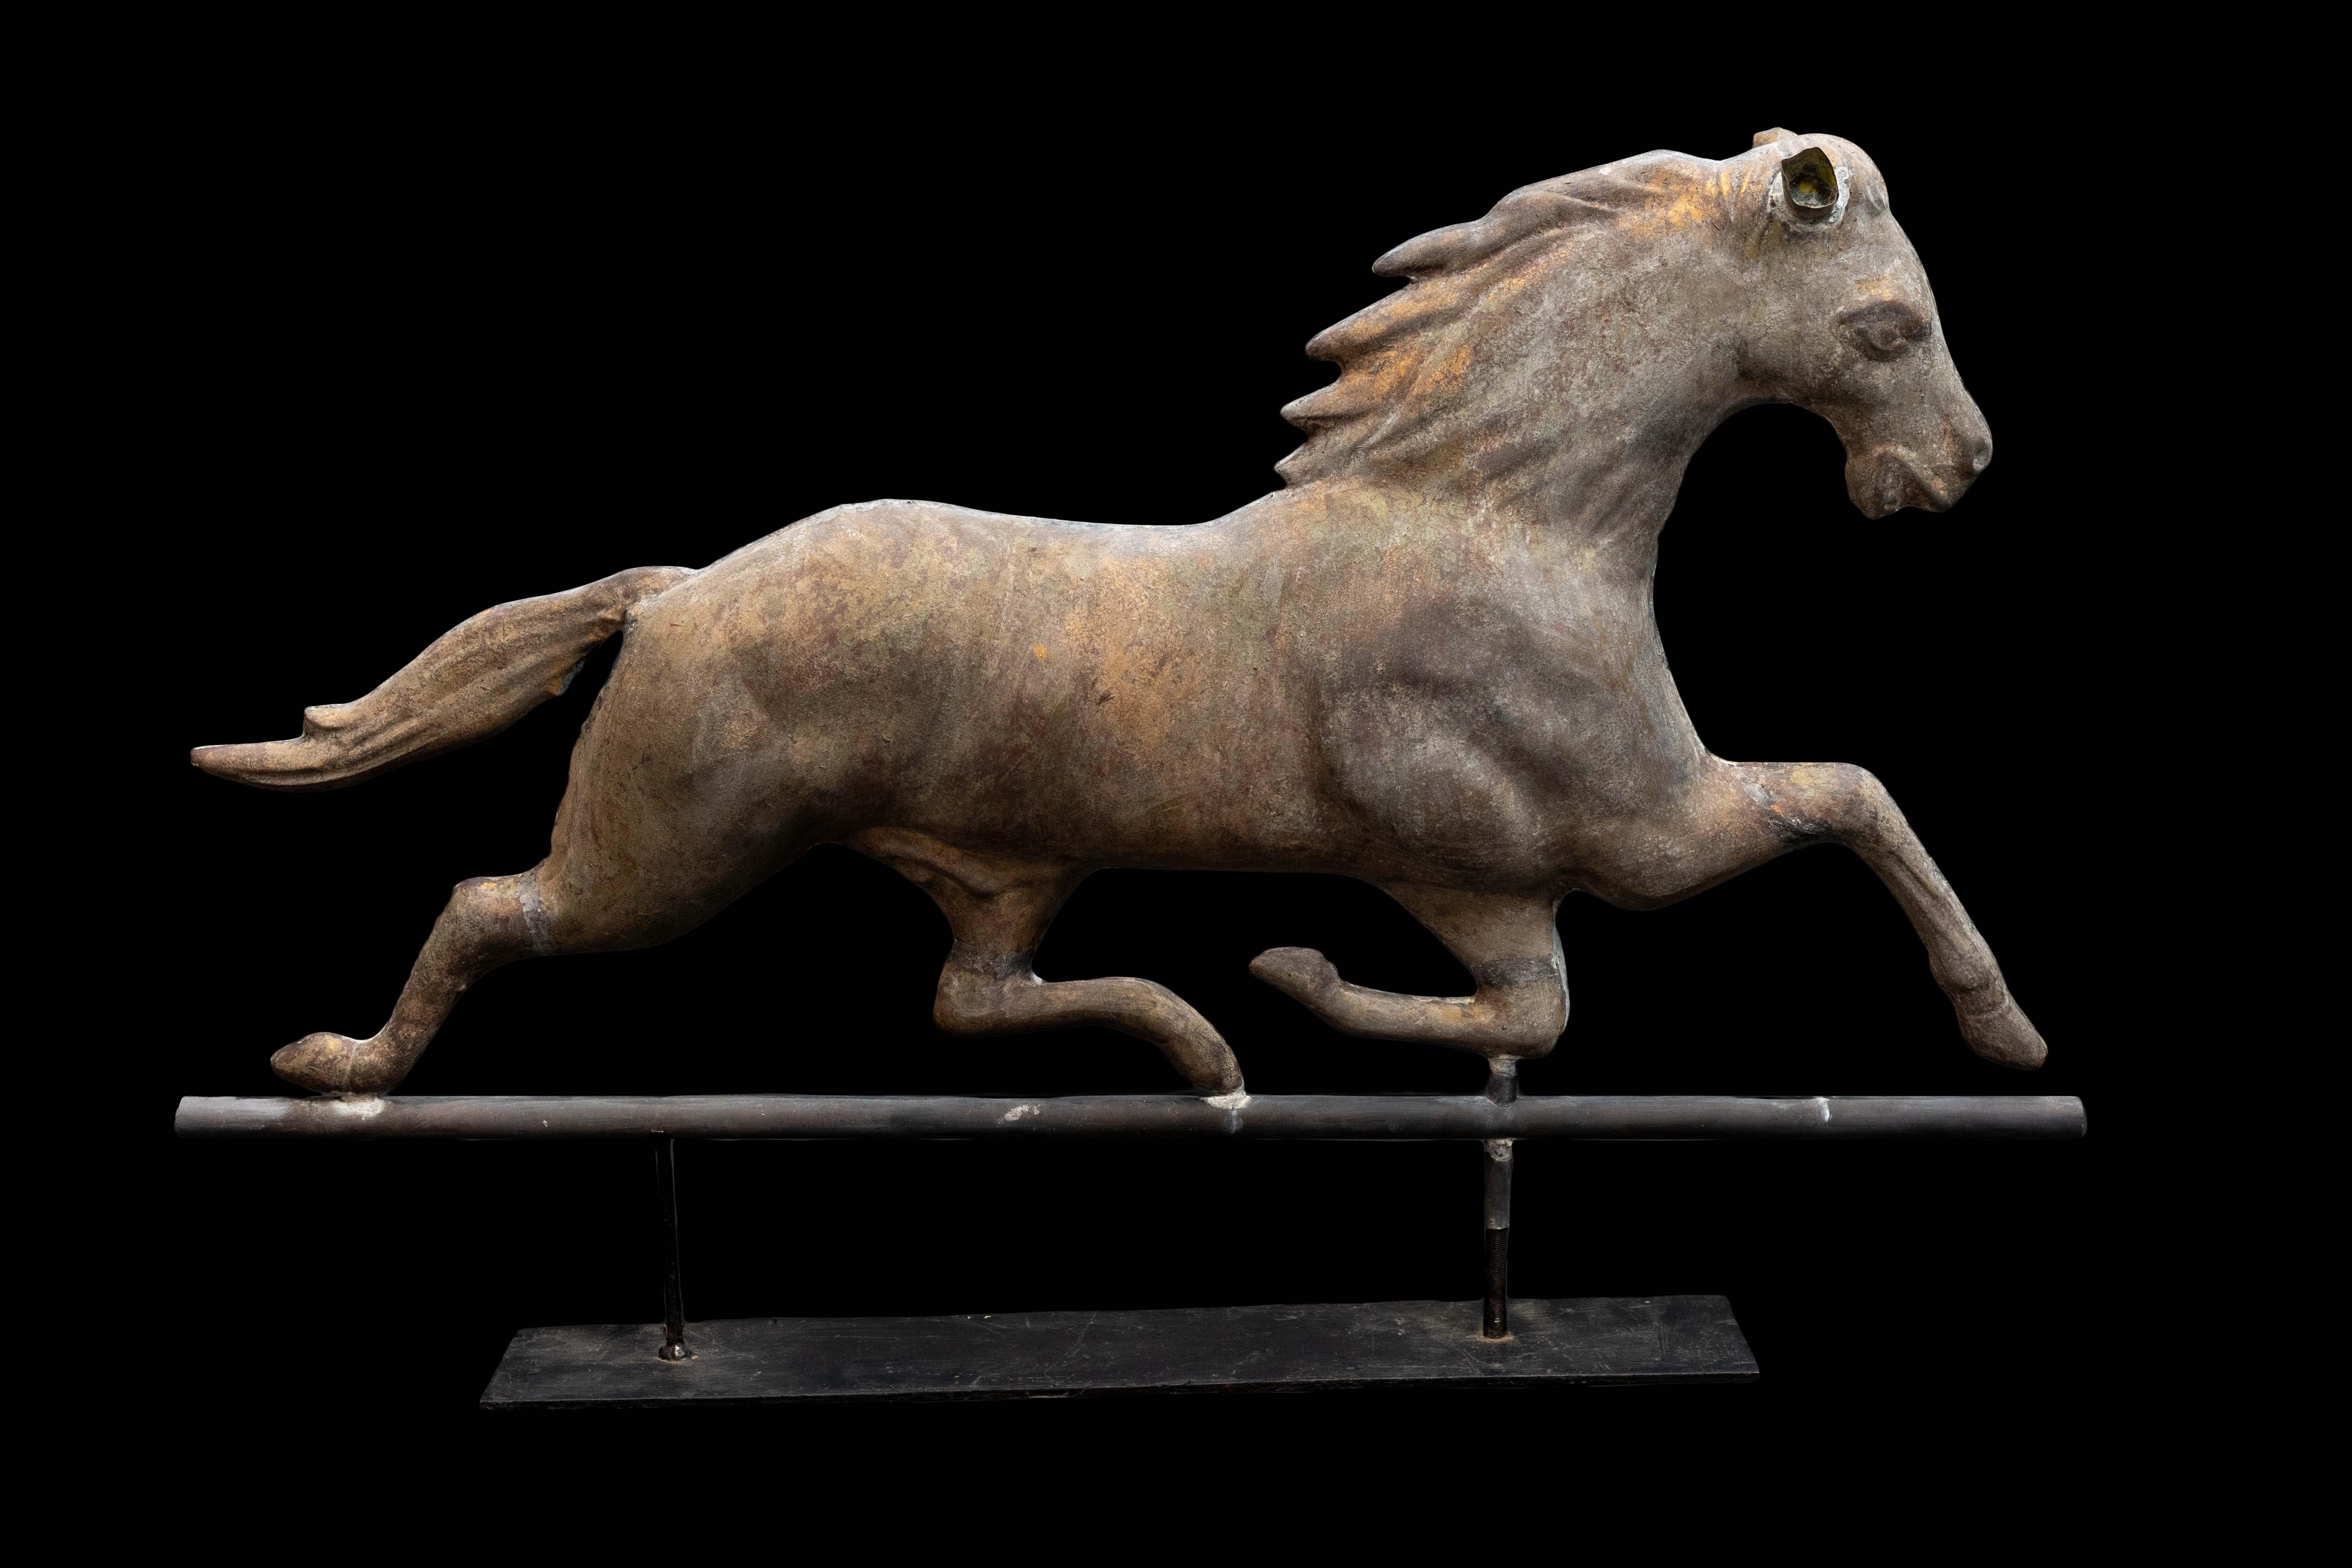 Mounted full bodied gilt horse weathervane

Measures approximately: 33